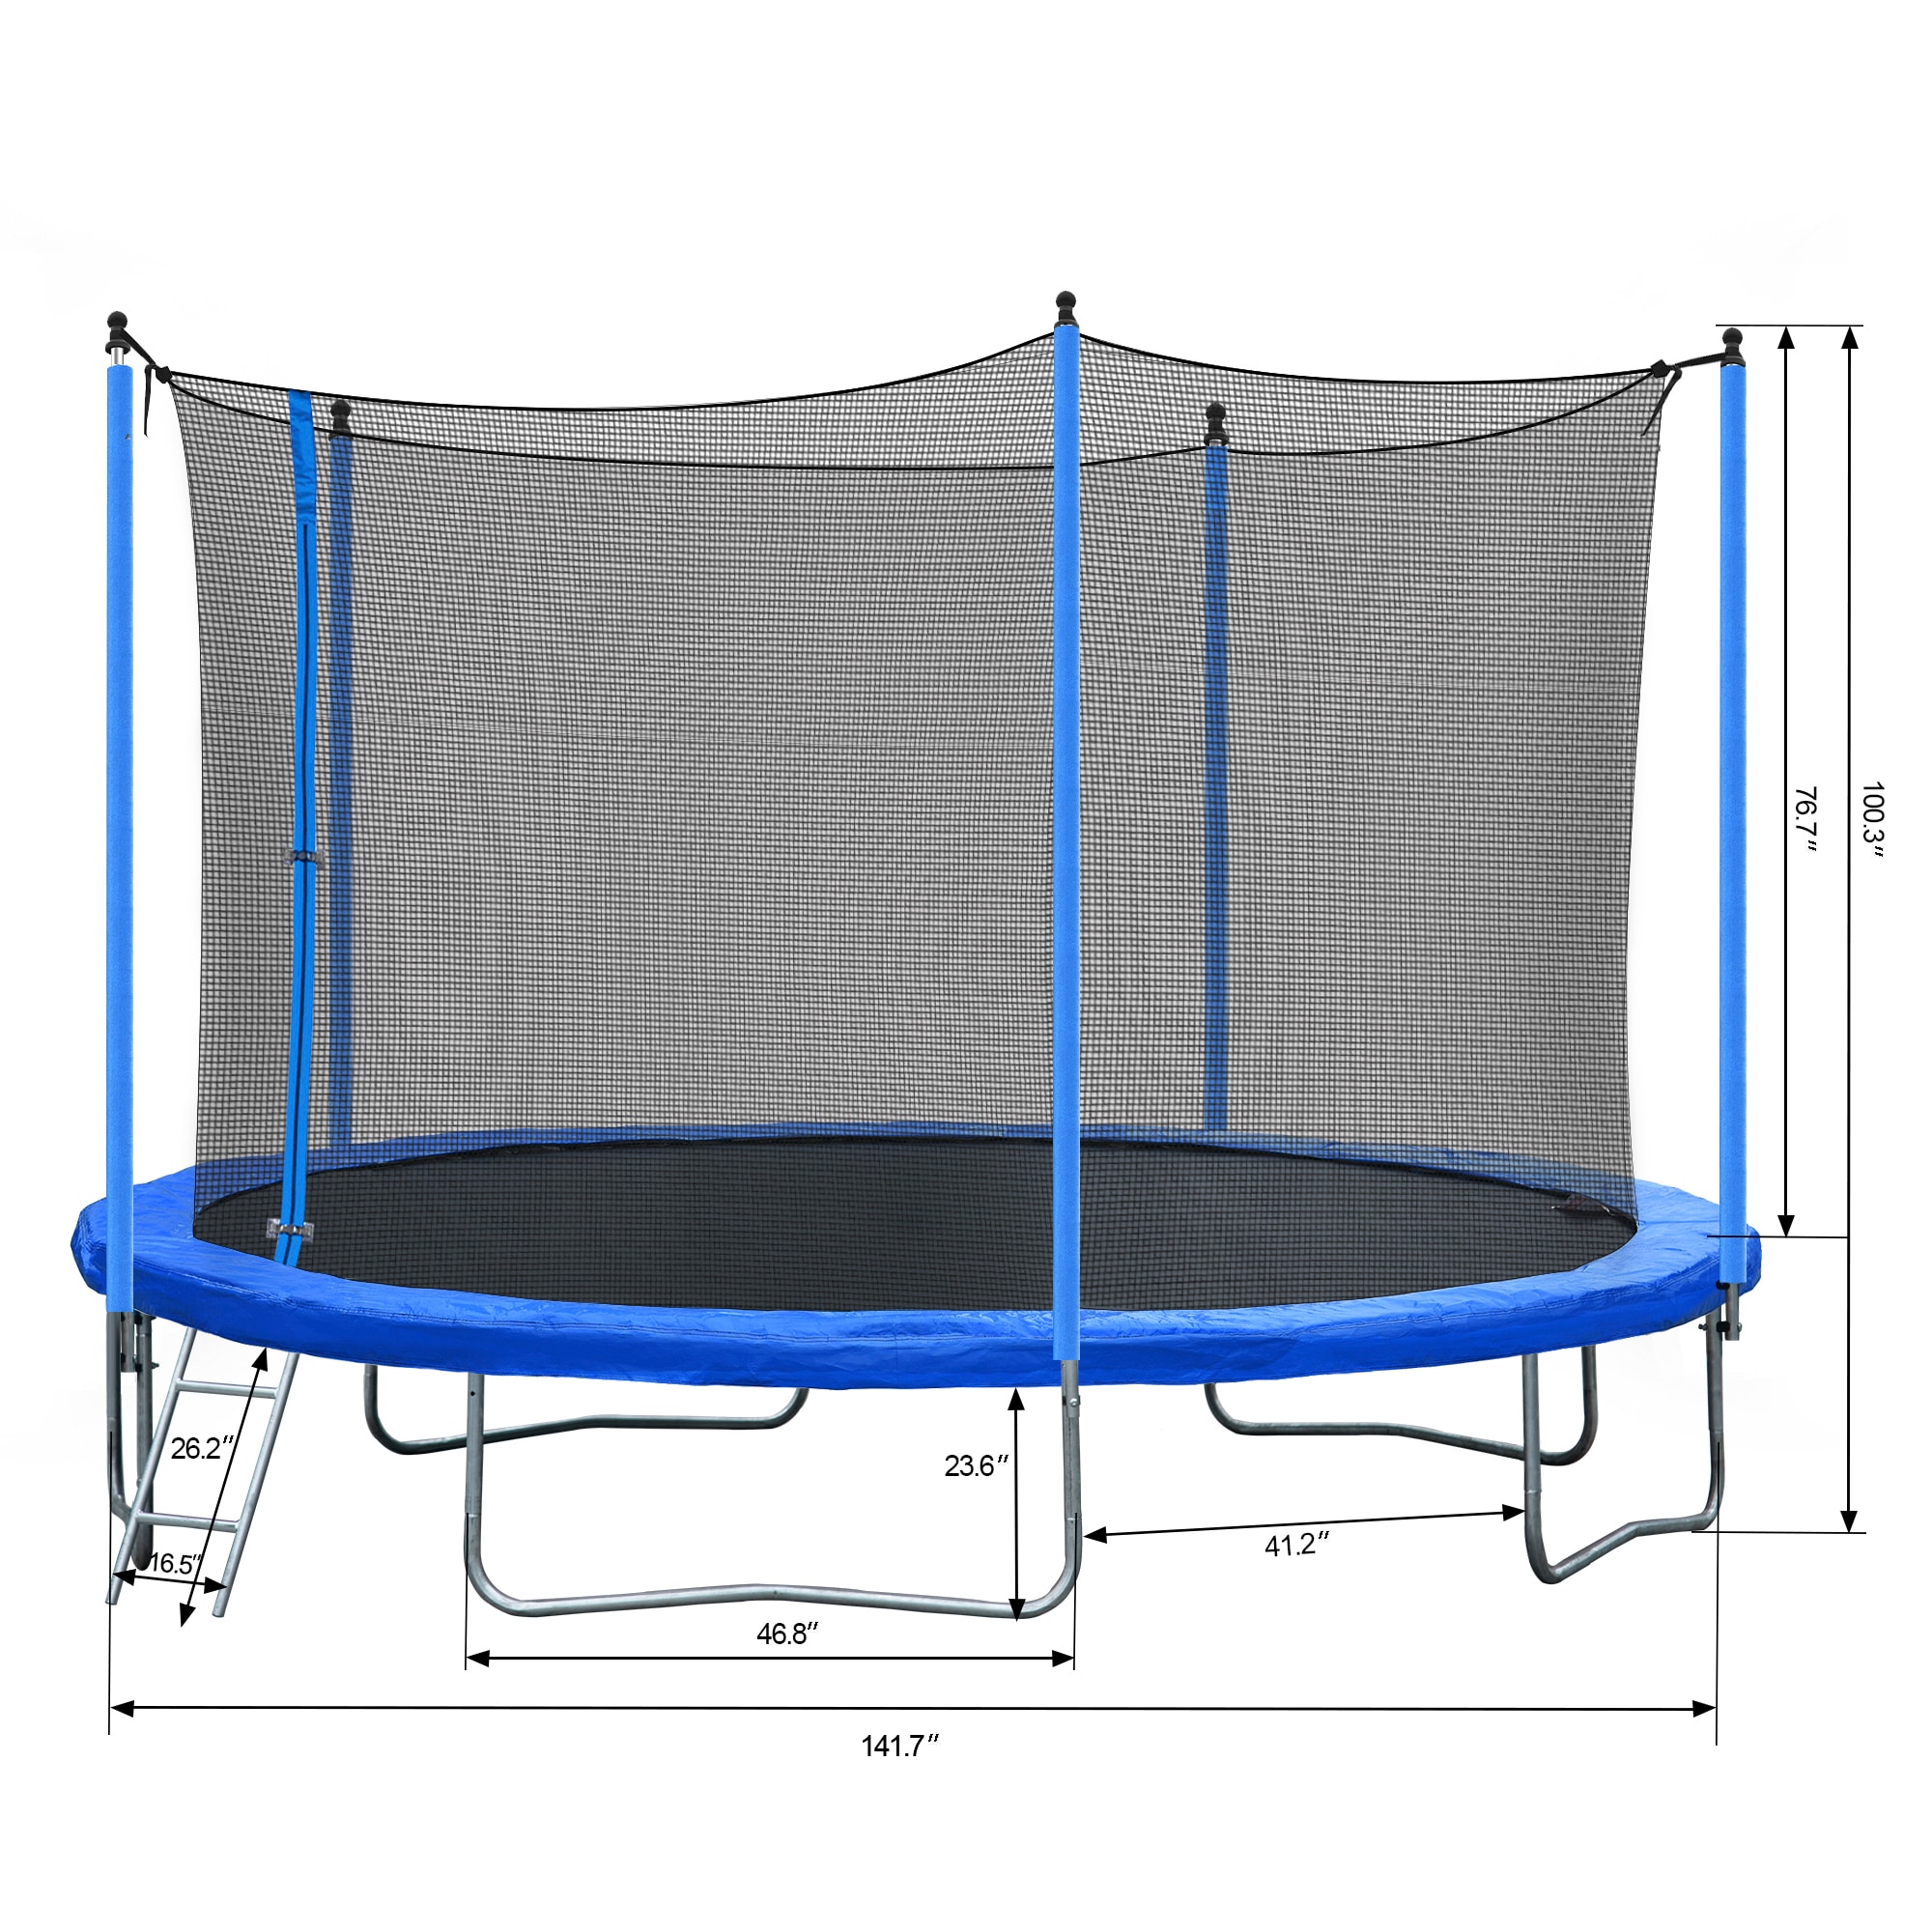 Maocao Hoom 12FT Round Backyard Trampoline with Safety Enclosure, UV ...